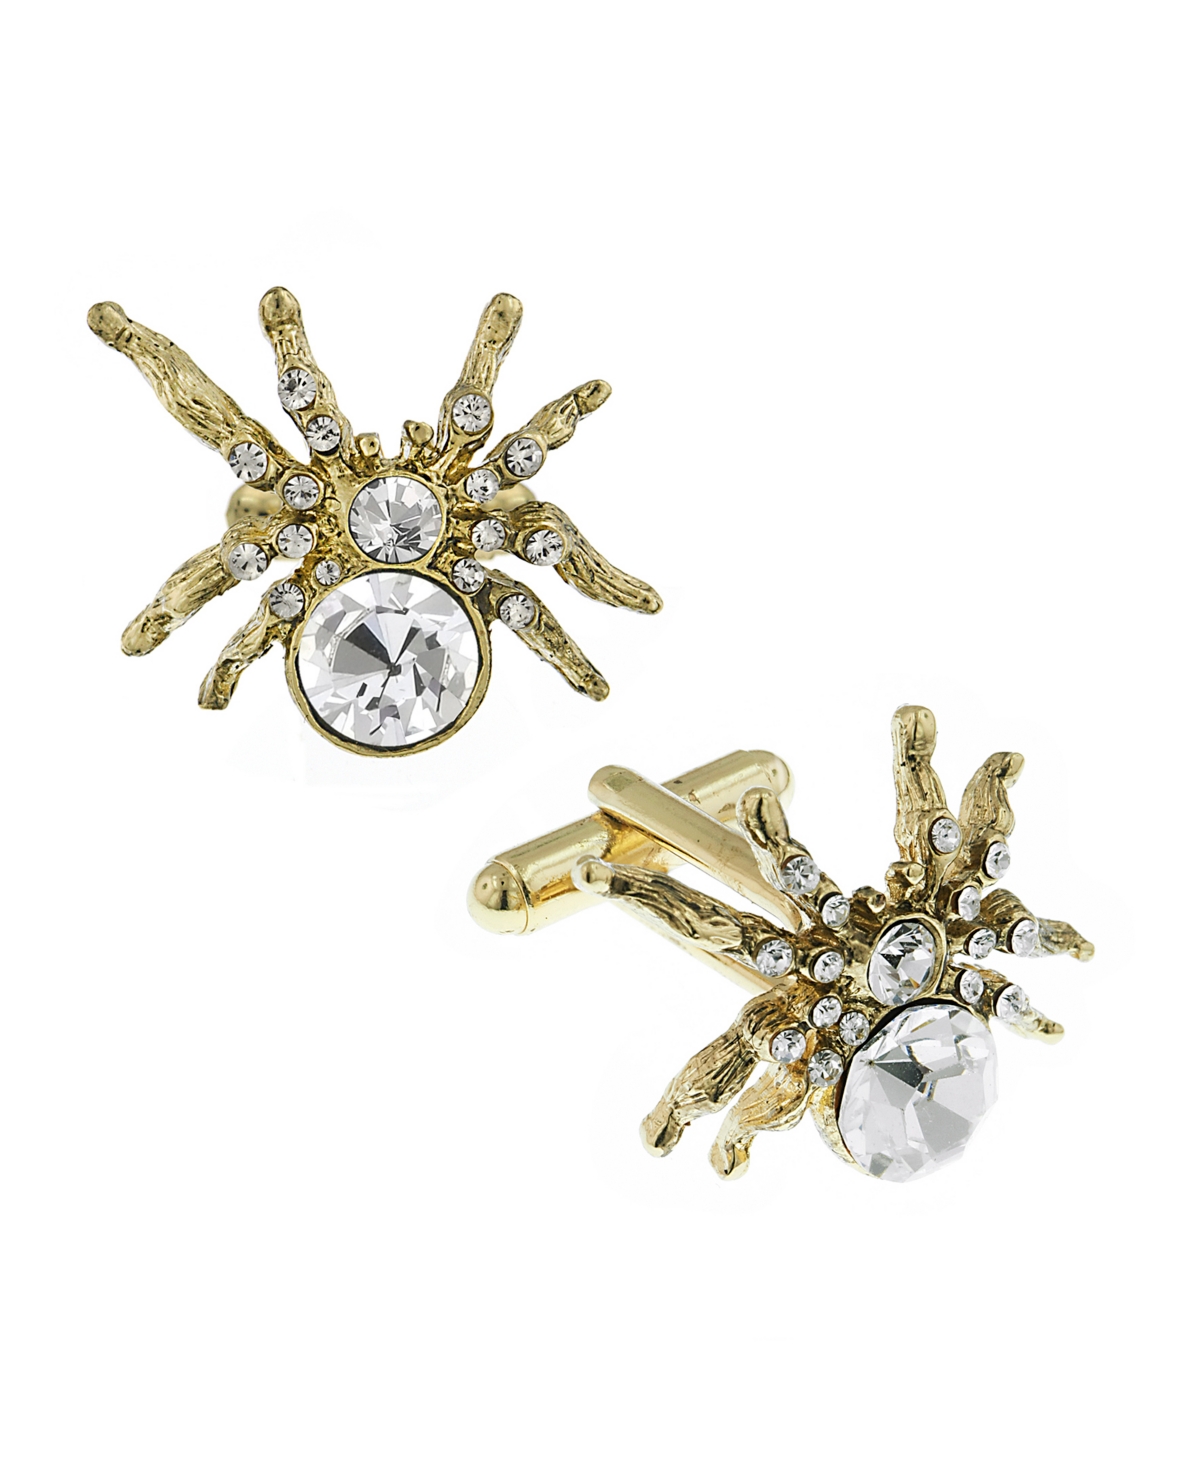 Jewelry 14K Gold Plated Crystal Spider Cufflinks - Blue